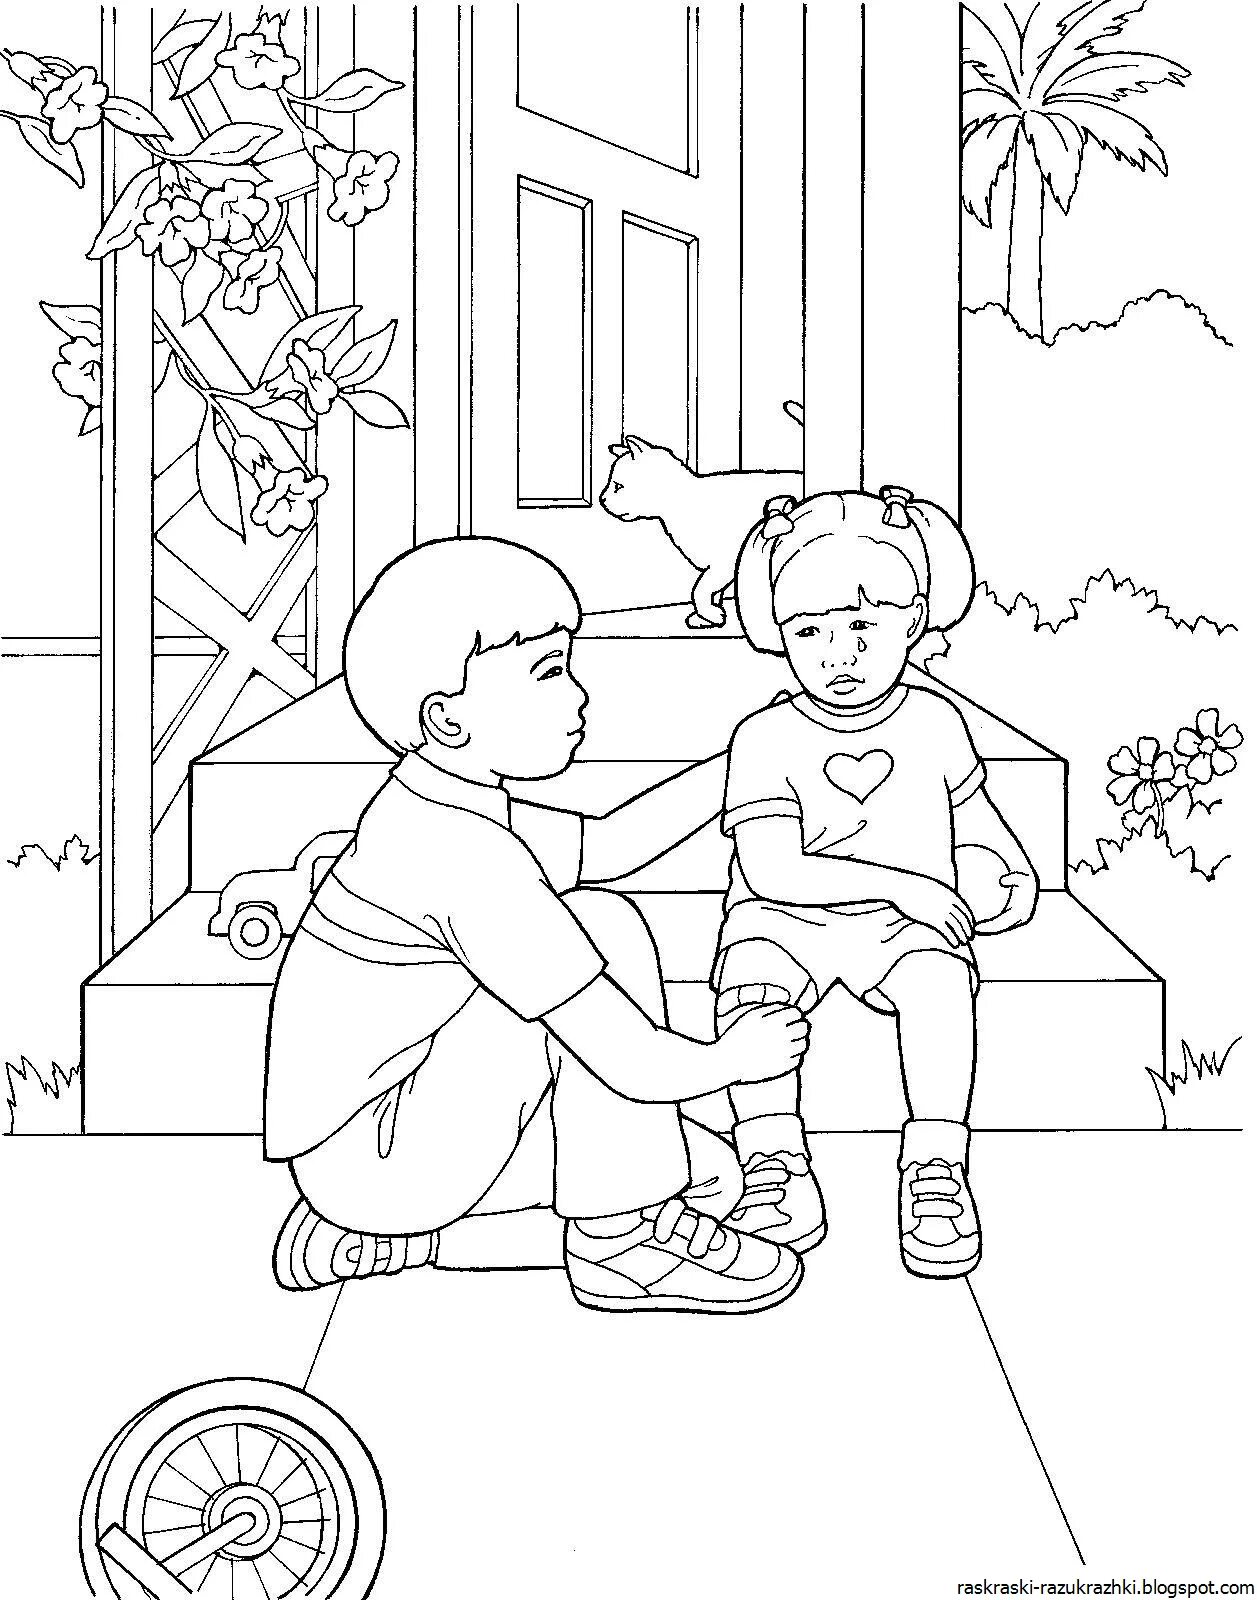 Exquisite brother and sister coloring pages